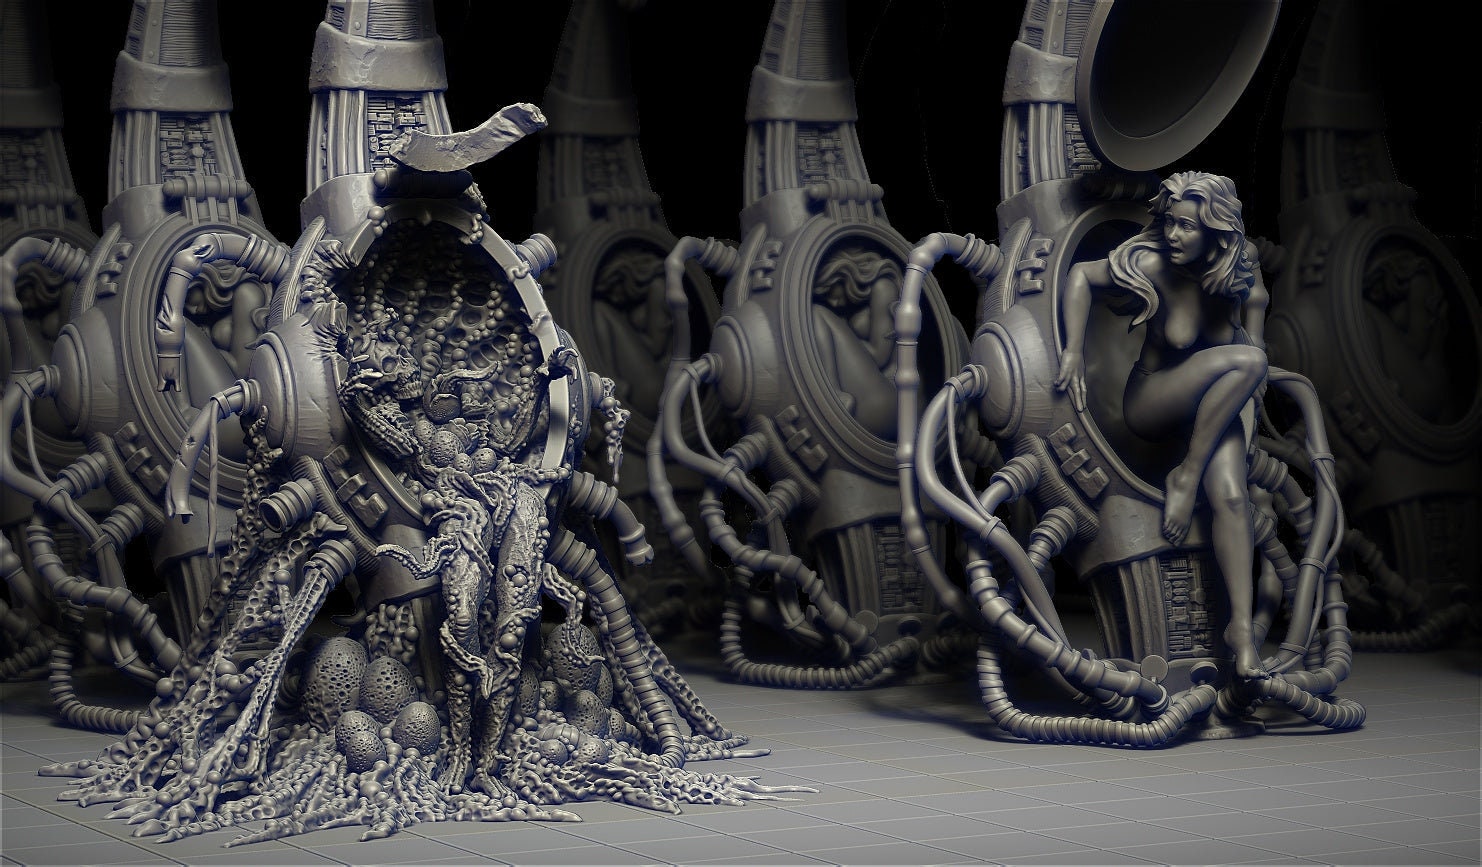 Waking Up To A Nightmare Diorama, Alien, Giger, Xenomorph